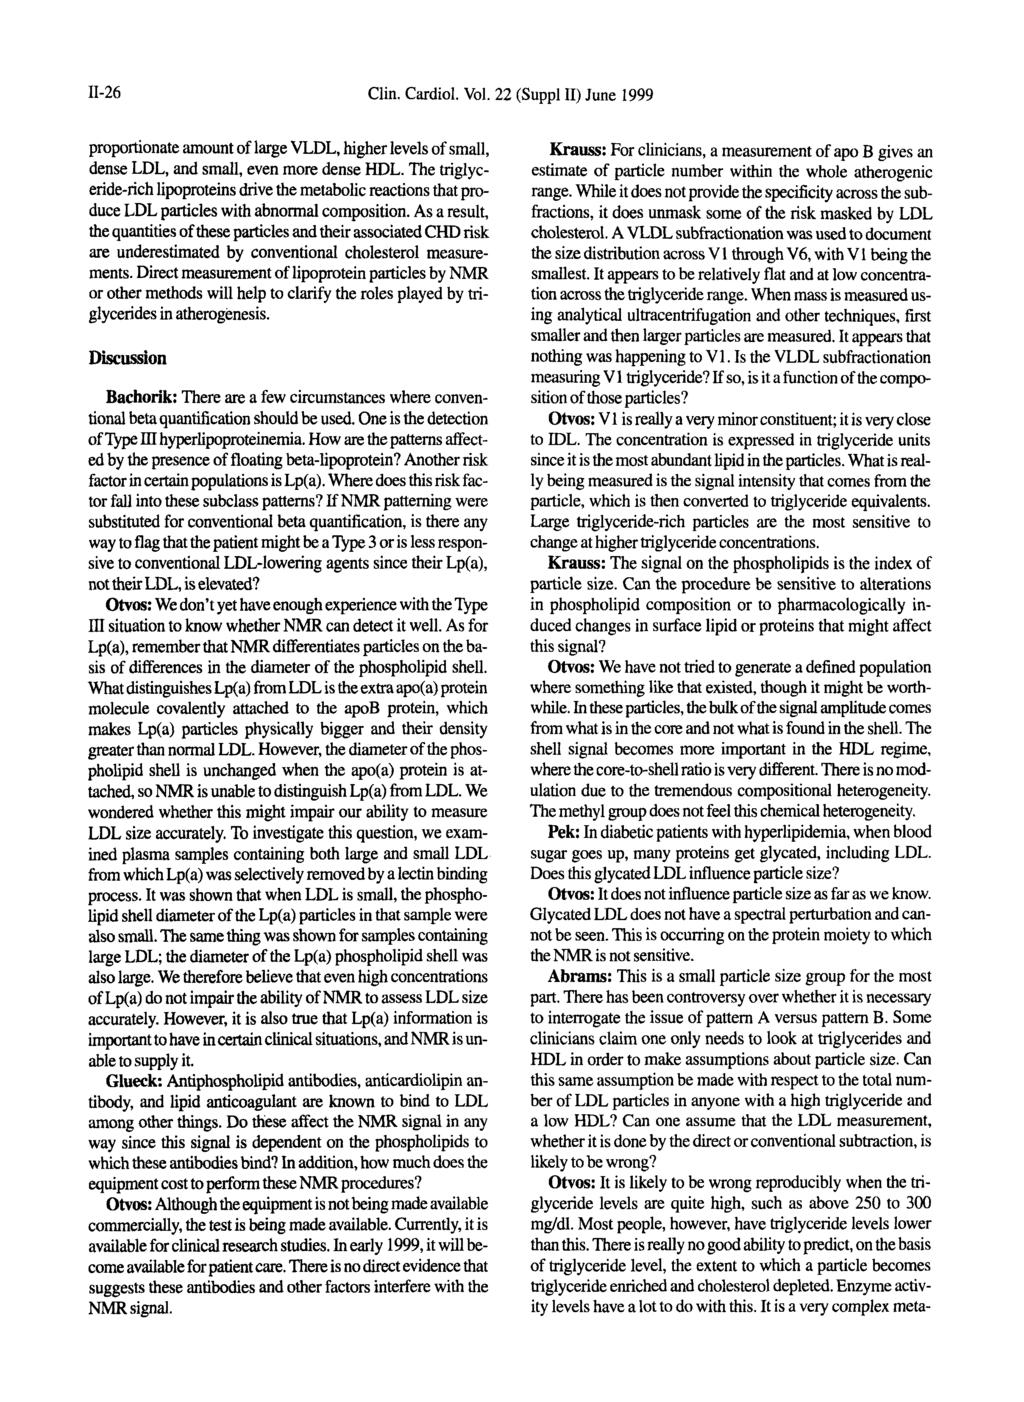 11-26 Clin. Cardiol. Vol. 22 (Suppl 11) June 1999 proportionate amount of large VLDL, higher levels of small, dense LDL, and small, even more dense HDL.